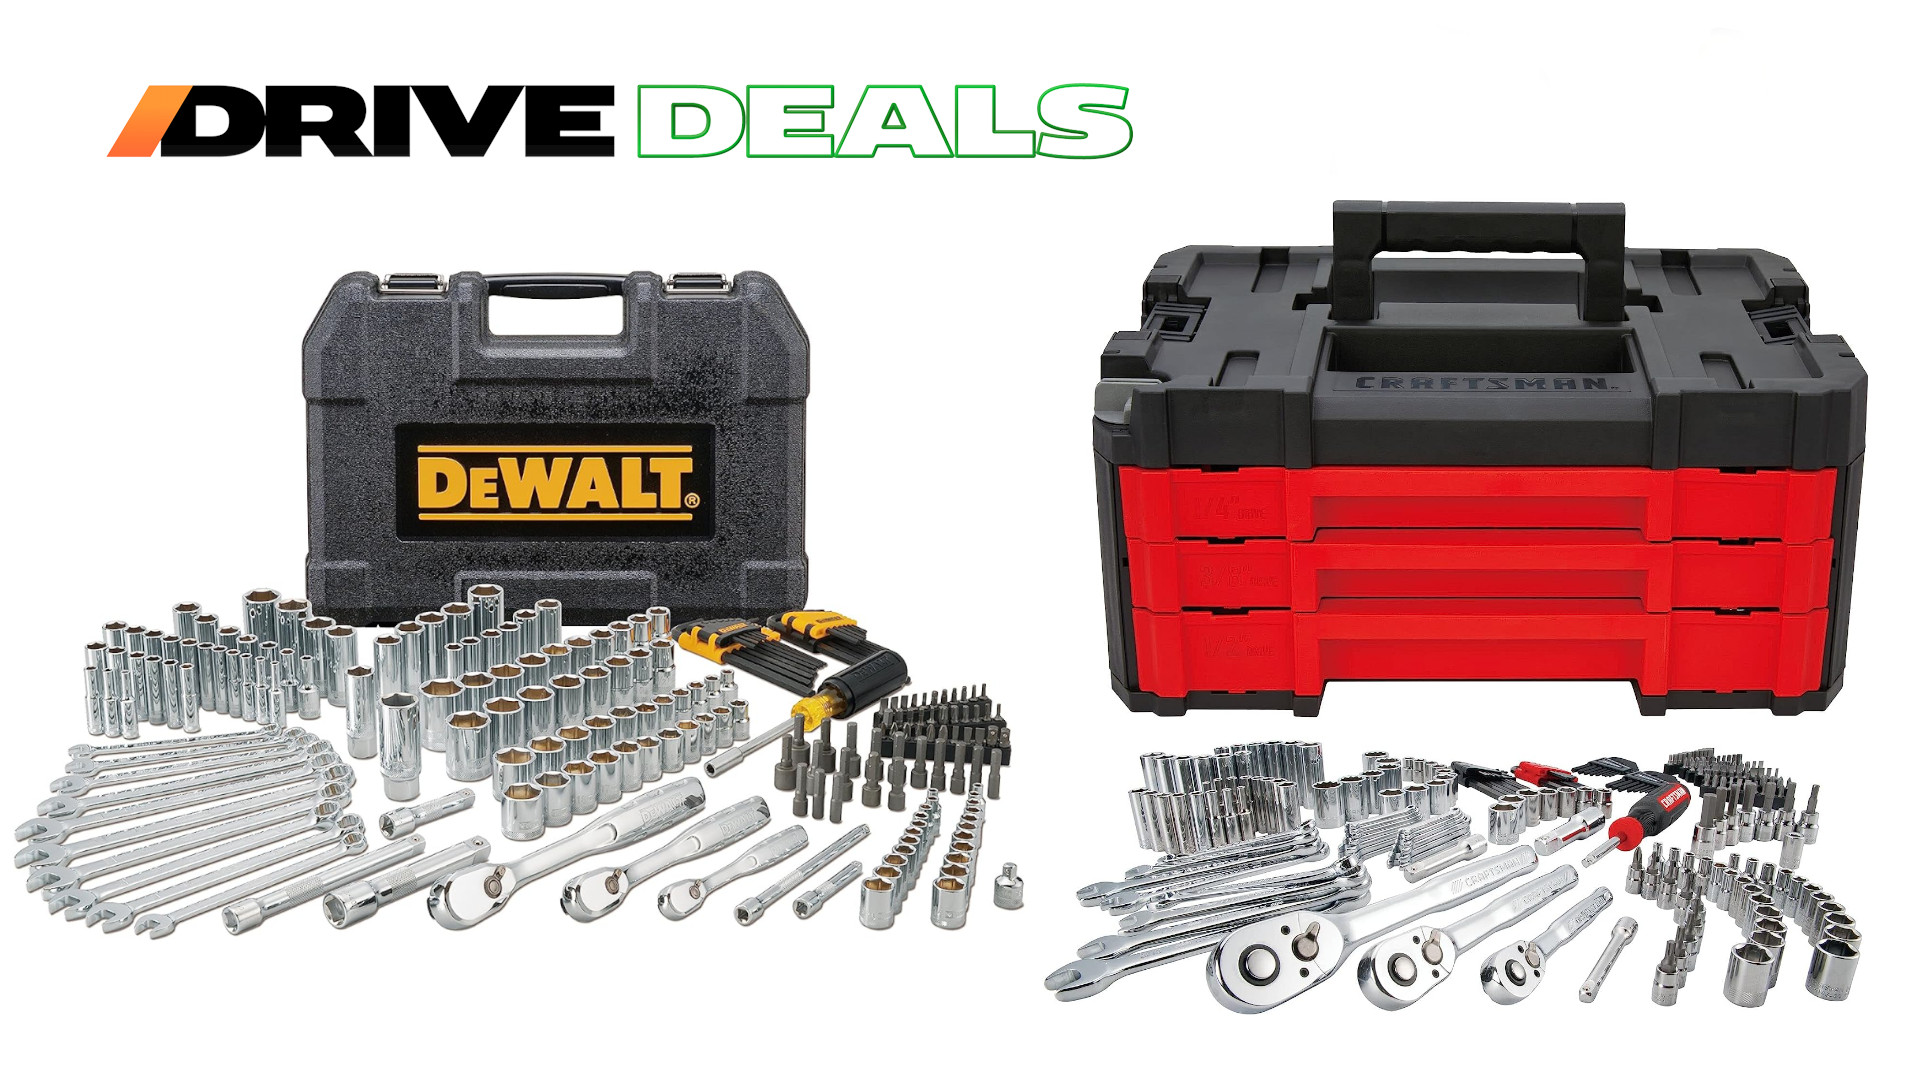 Refresh Your Toolkit With Deals on Mechanics Sets at Amazon